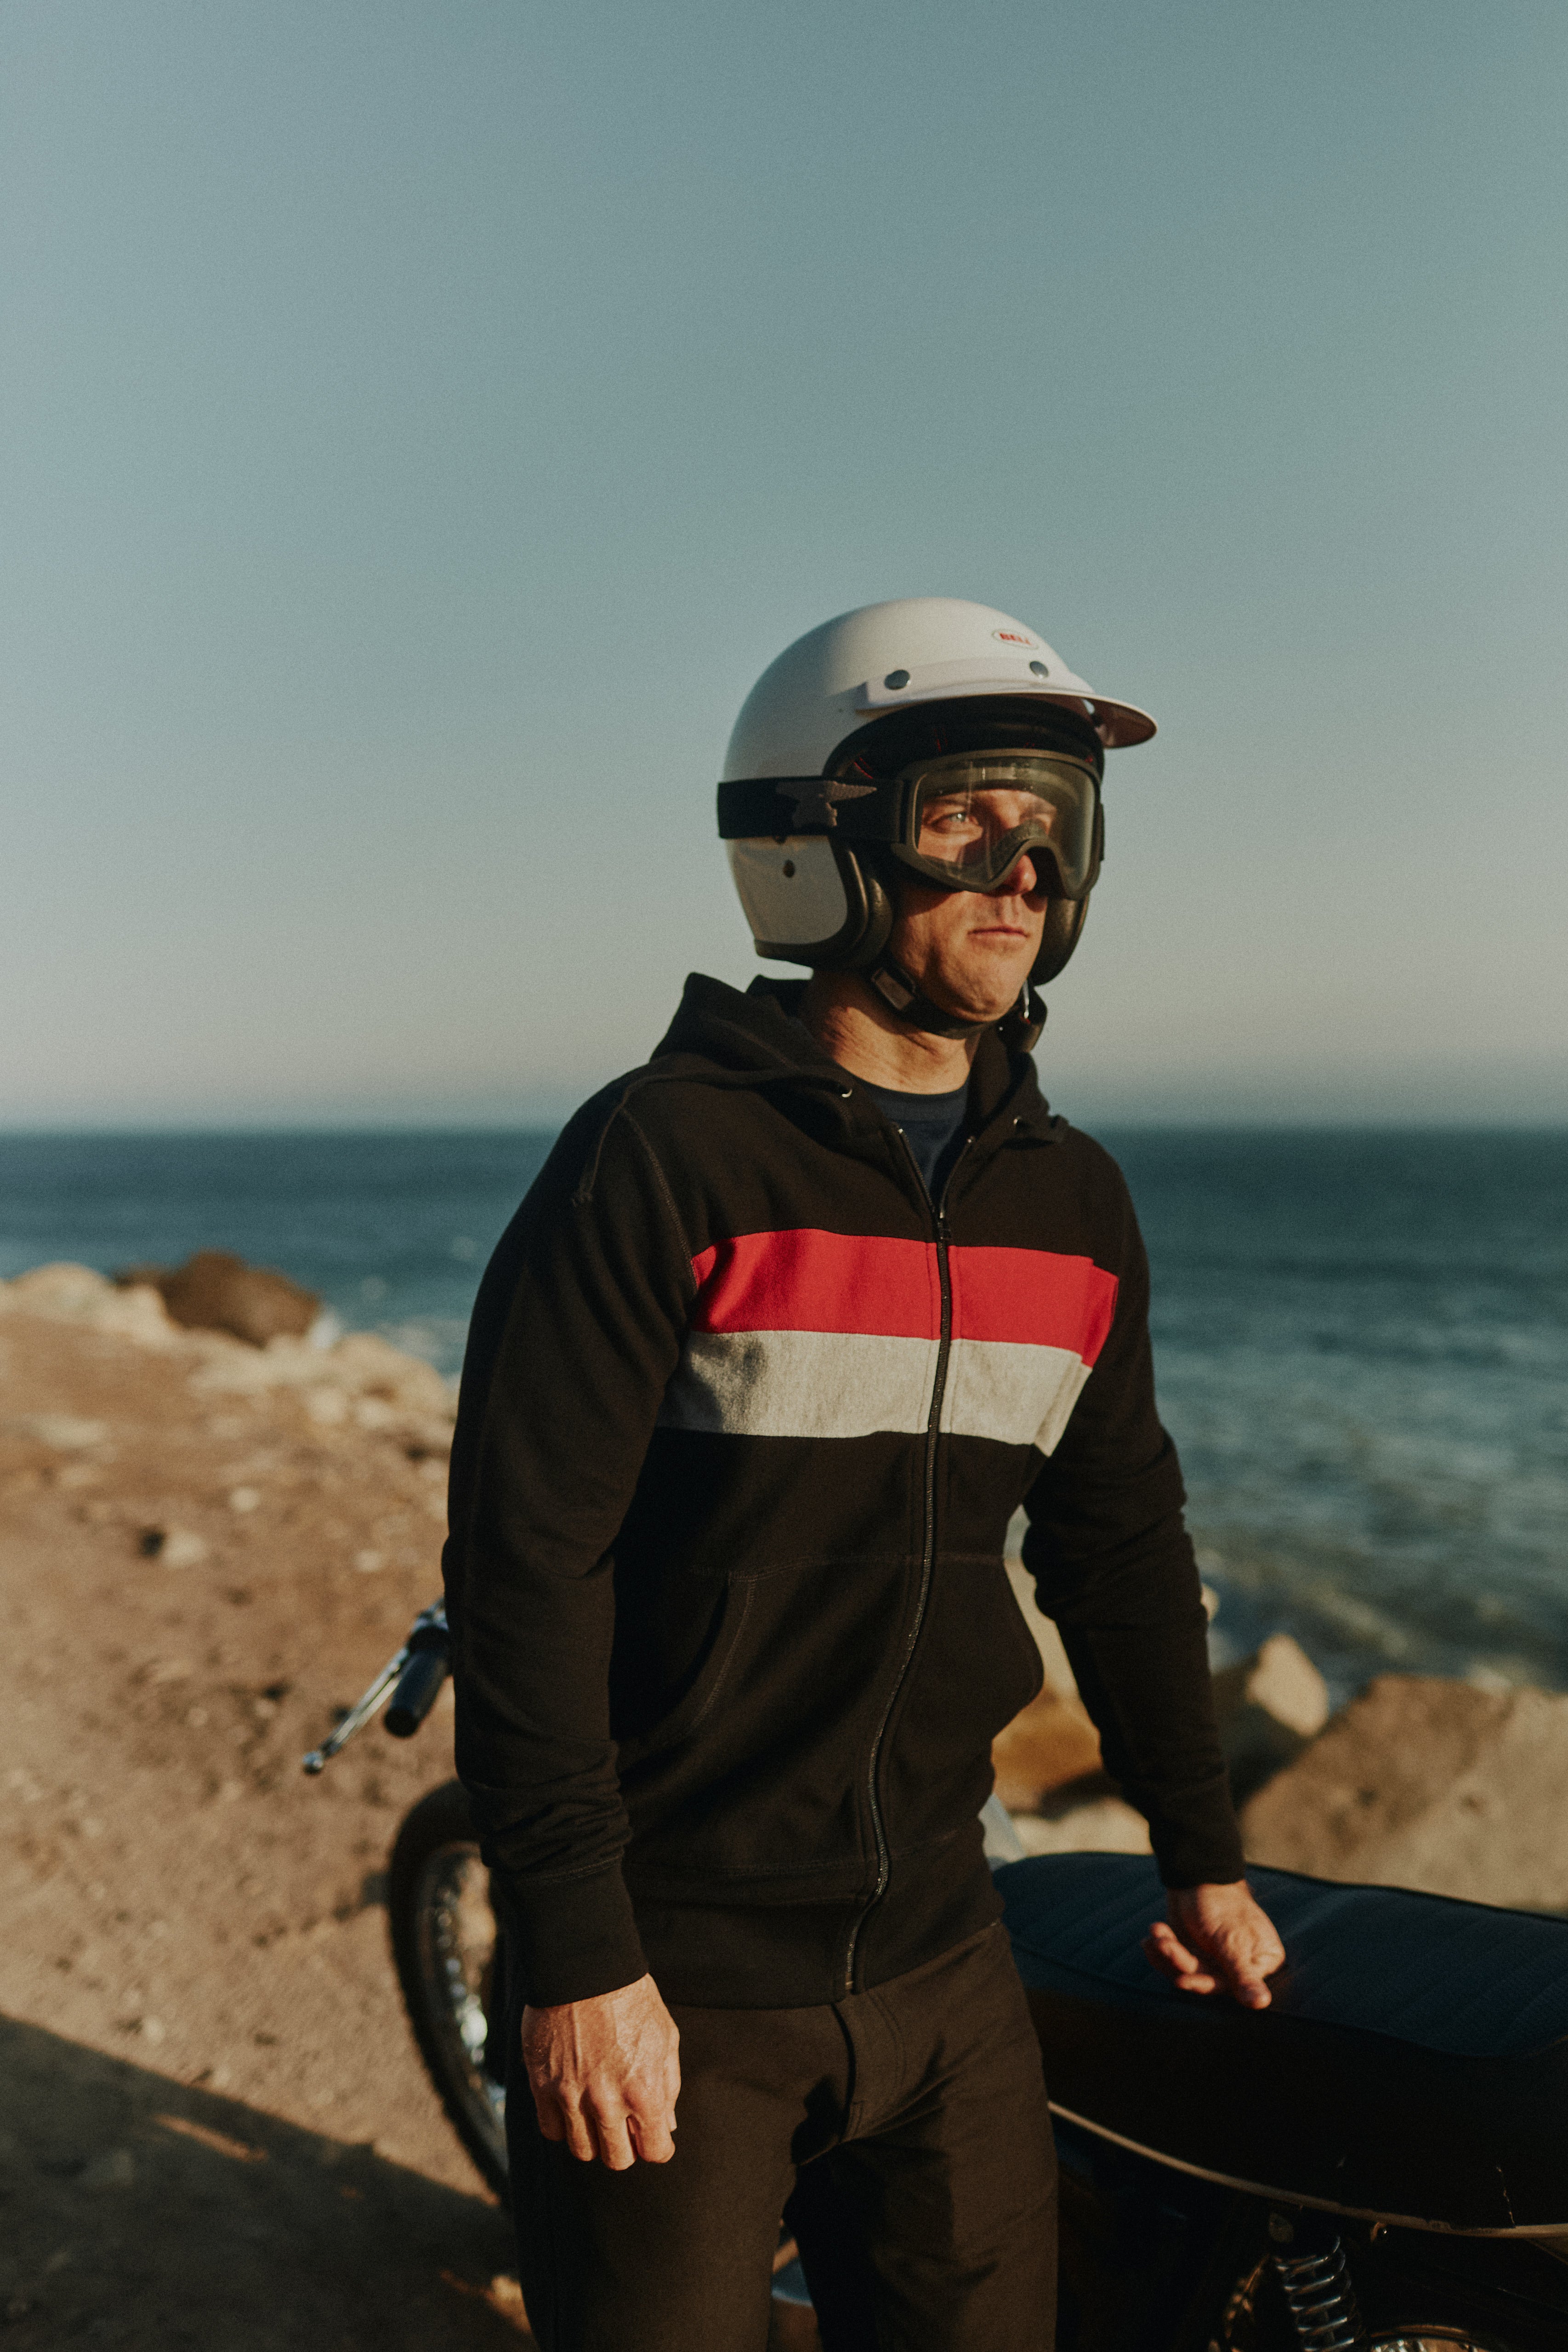 Man on a dirt road standing next to a vintage motorbike overlooking the Pacific ocean wearing a helmet and the Foreign Rider Striped Full Zip Hooded Sweatshirt